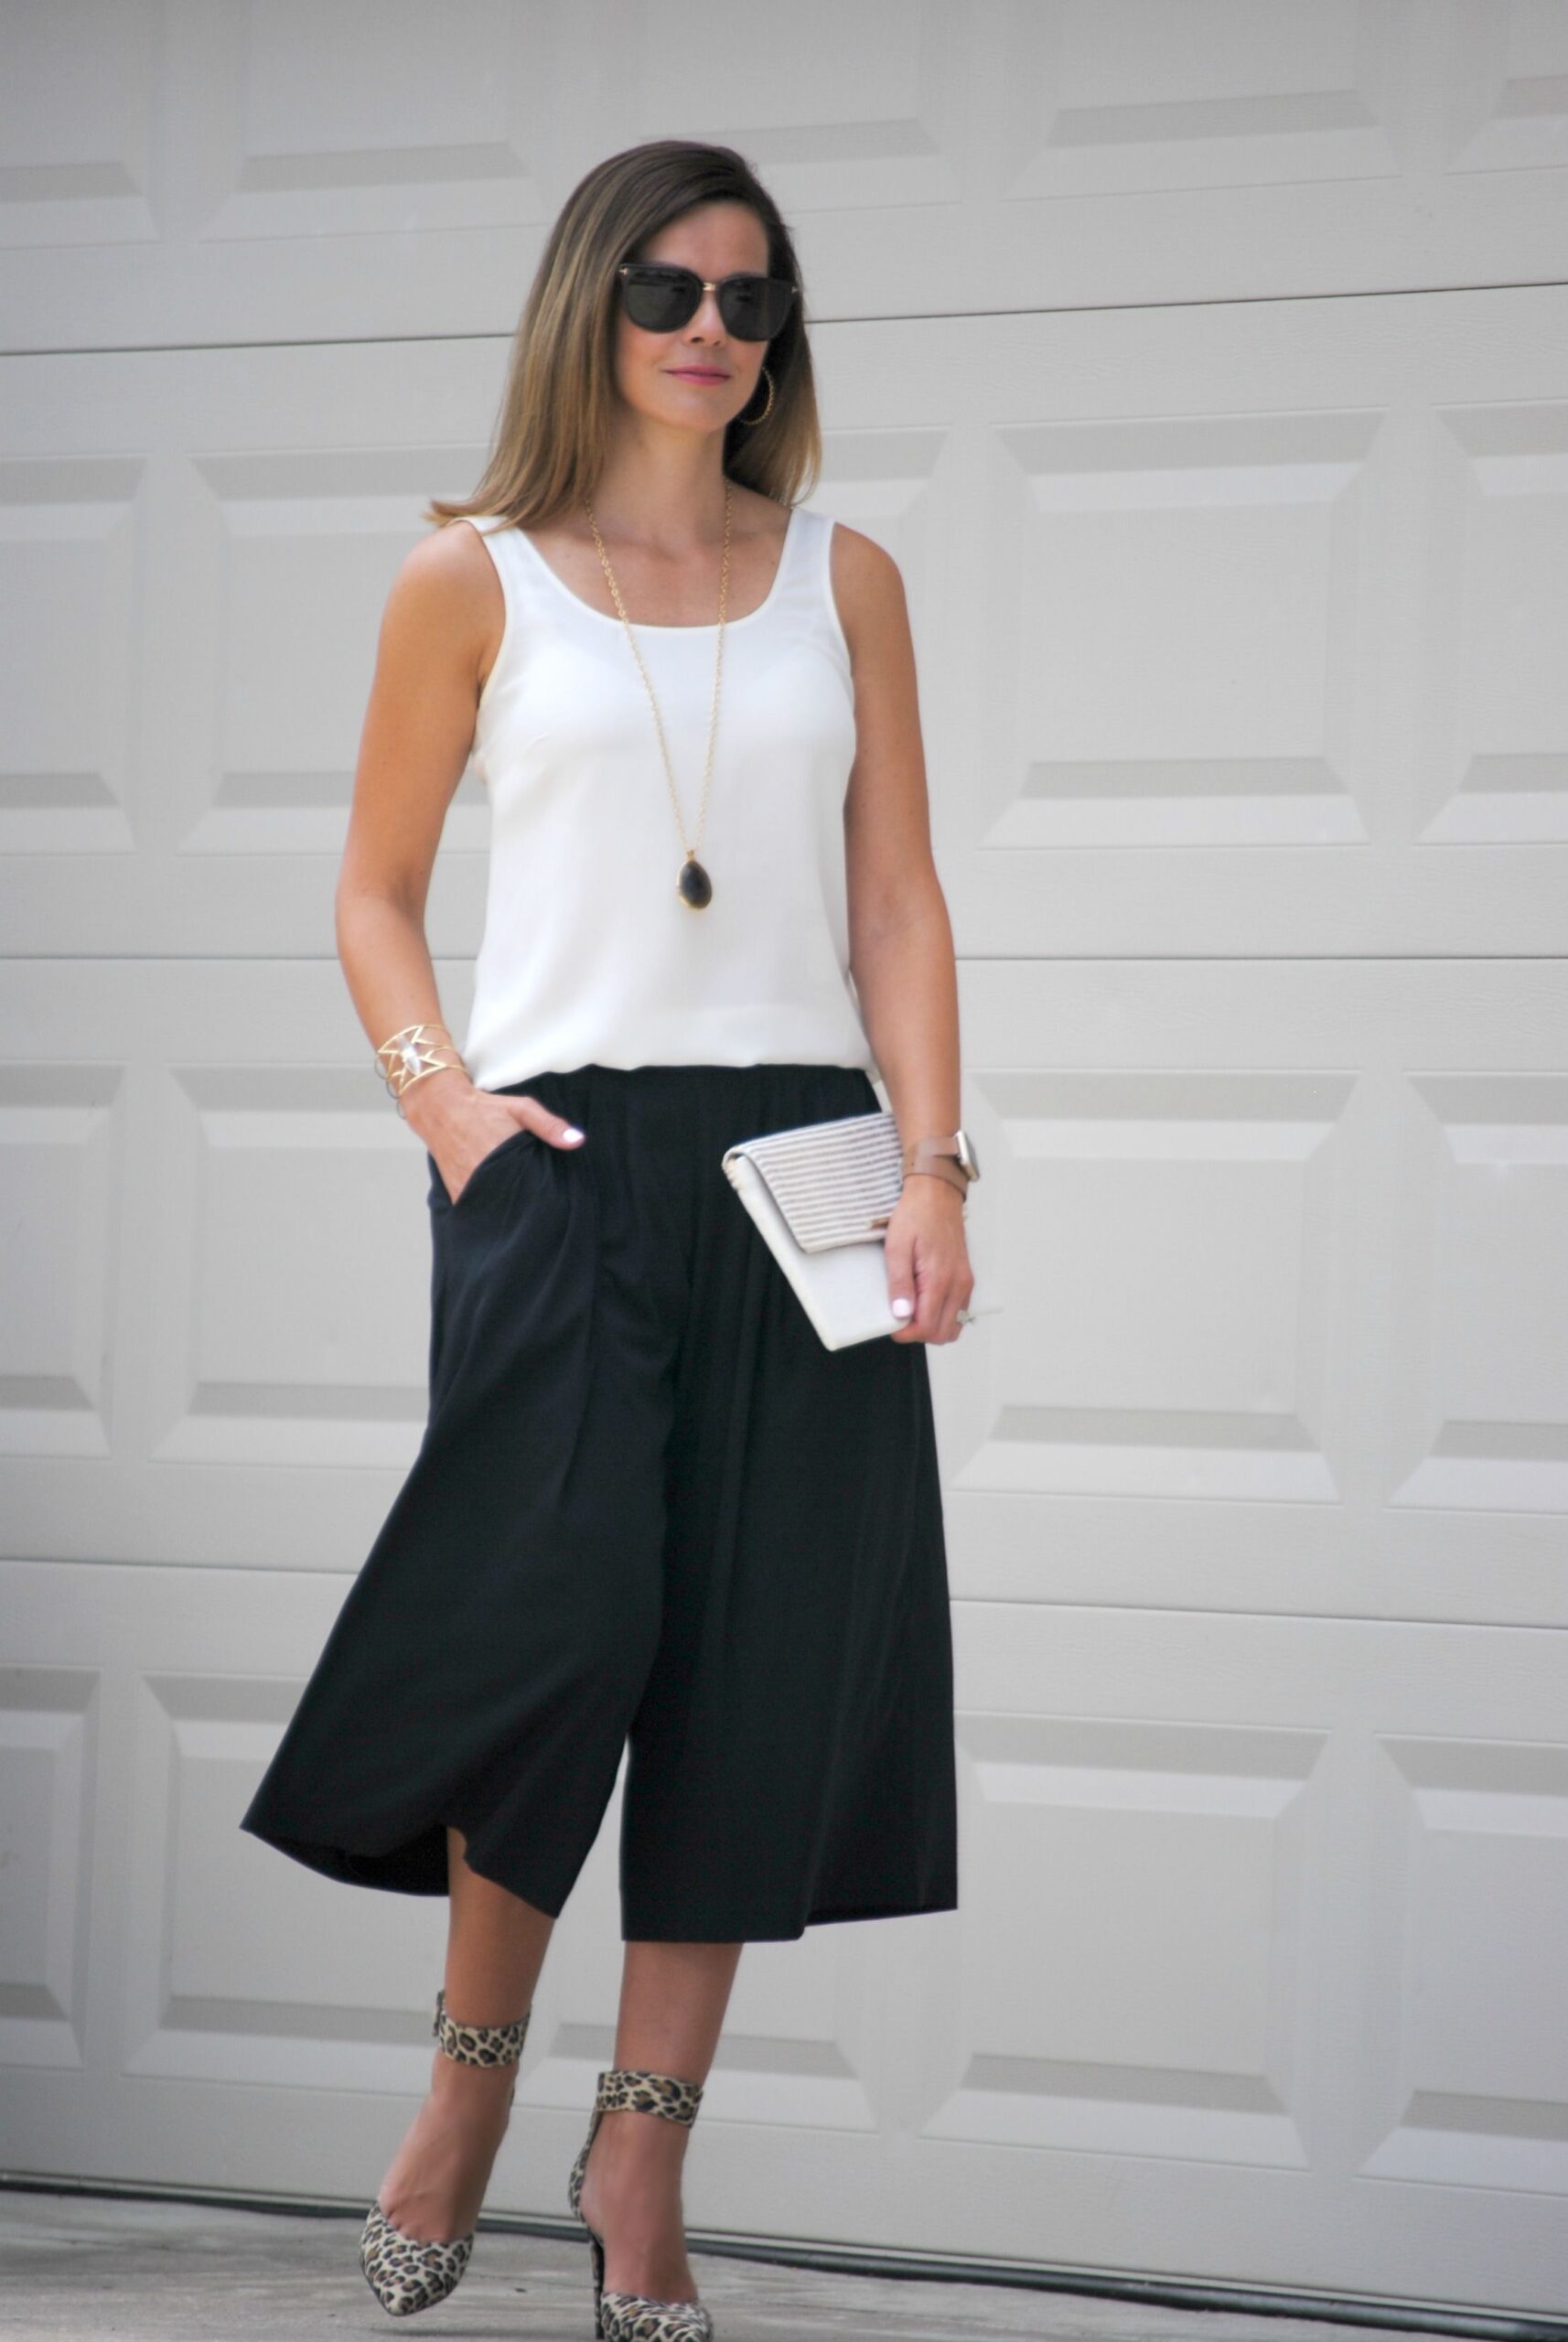 Black Culottes Outfit Ideas